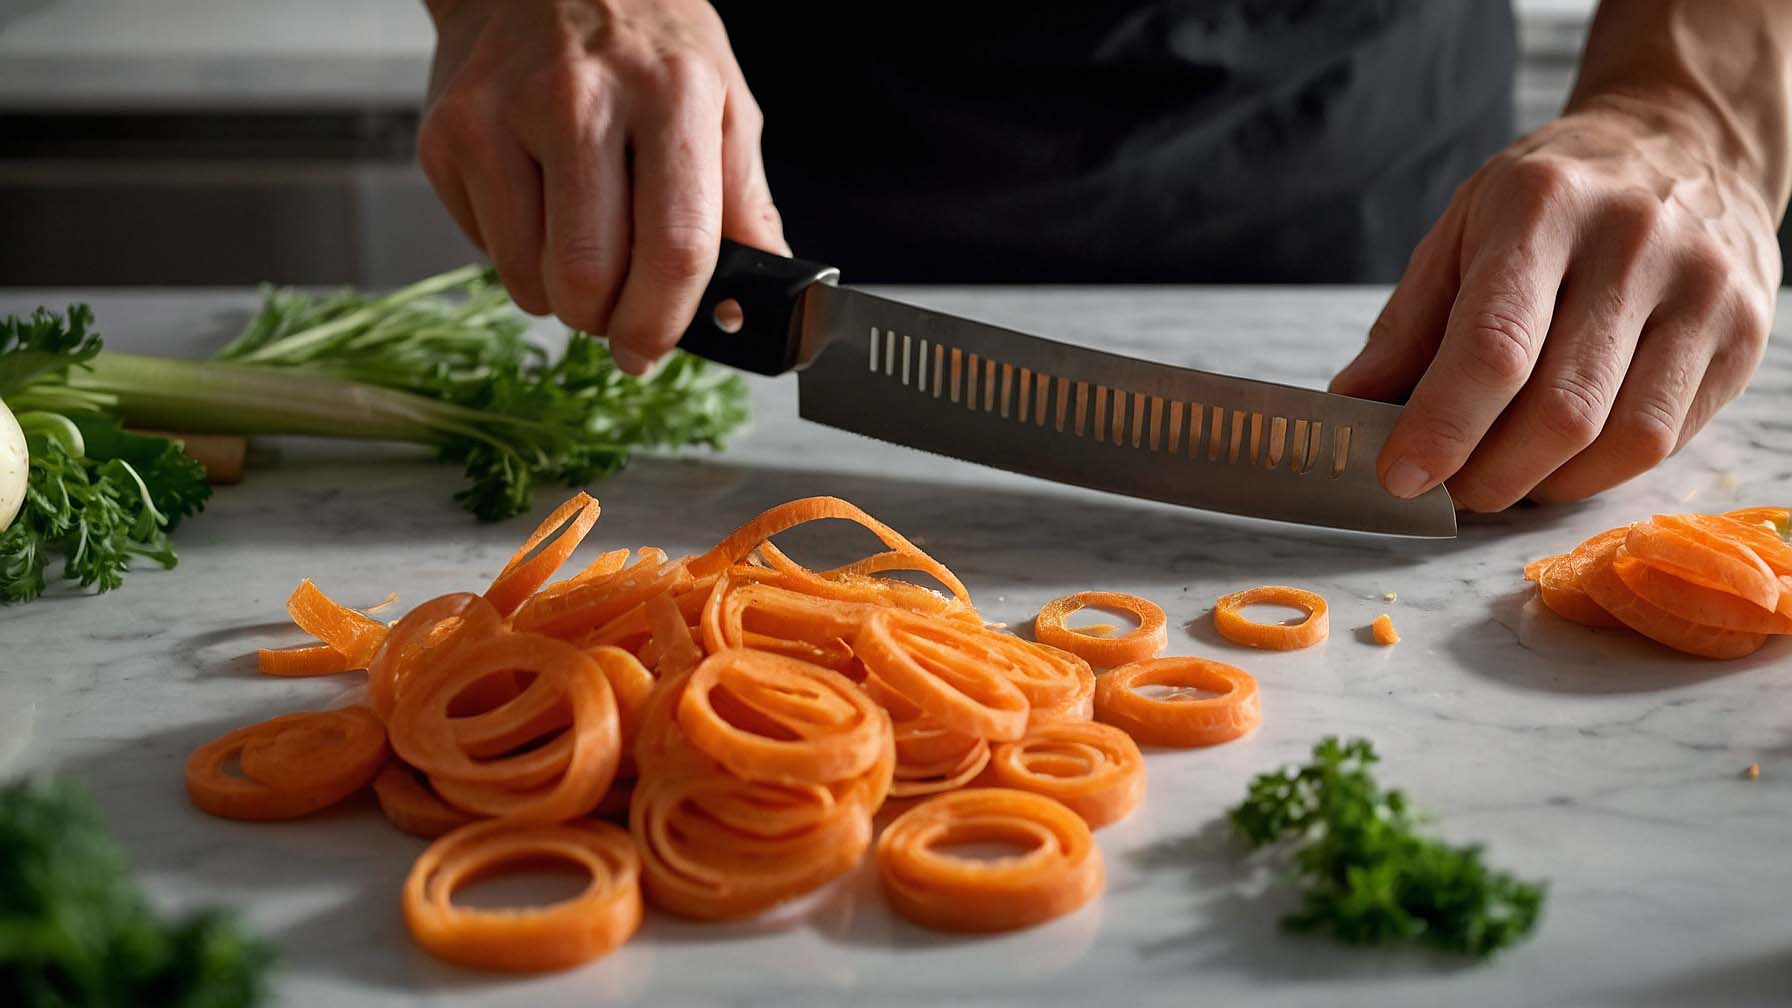 How to Crinkle Cut Carrots: The Ultimate Kitchen Skill